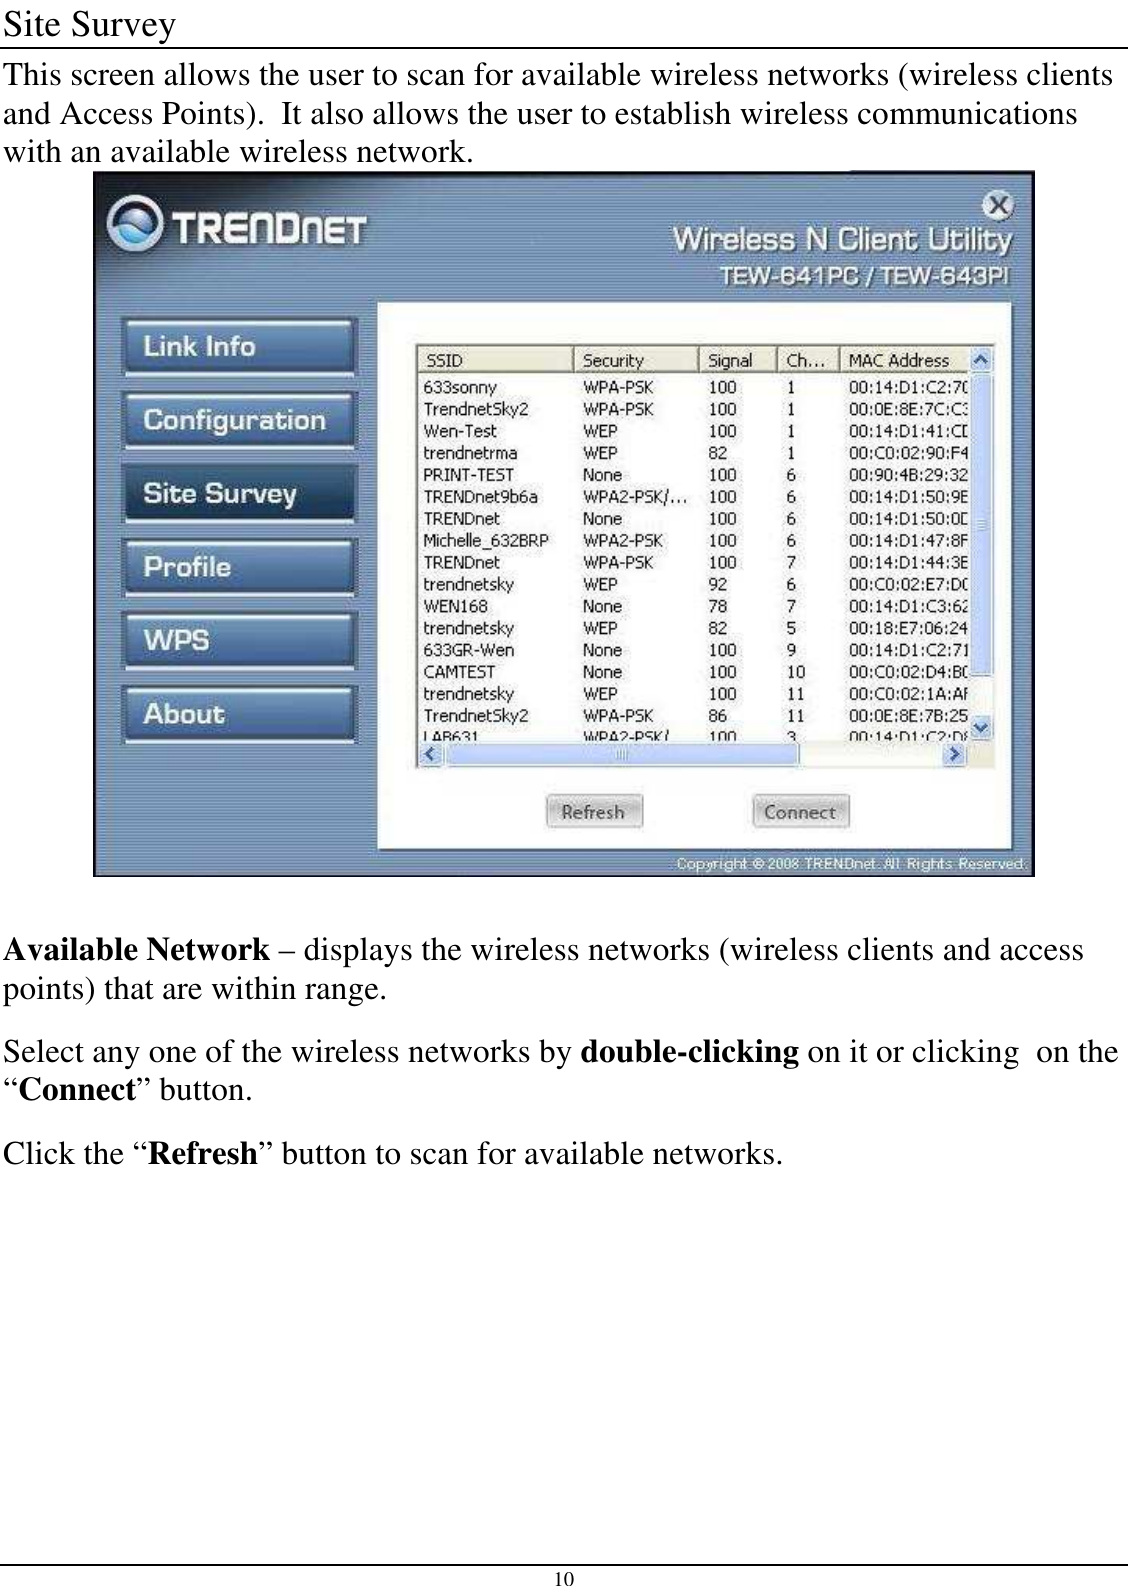 10 Site Survey This screen allows the user to scan for available wireless networks (wireless clients and Access Points).  It also allows the user to establish wireless communications with an available wireless network.   Available Network – displays the wireless networks (wireless clients and access points) that are within range.  Select any one of the wireless networks by double-clicking on it or clicking  on the “Connect” button. Click the “Refresh” button to scan for available networks.      